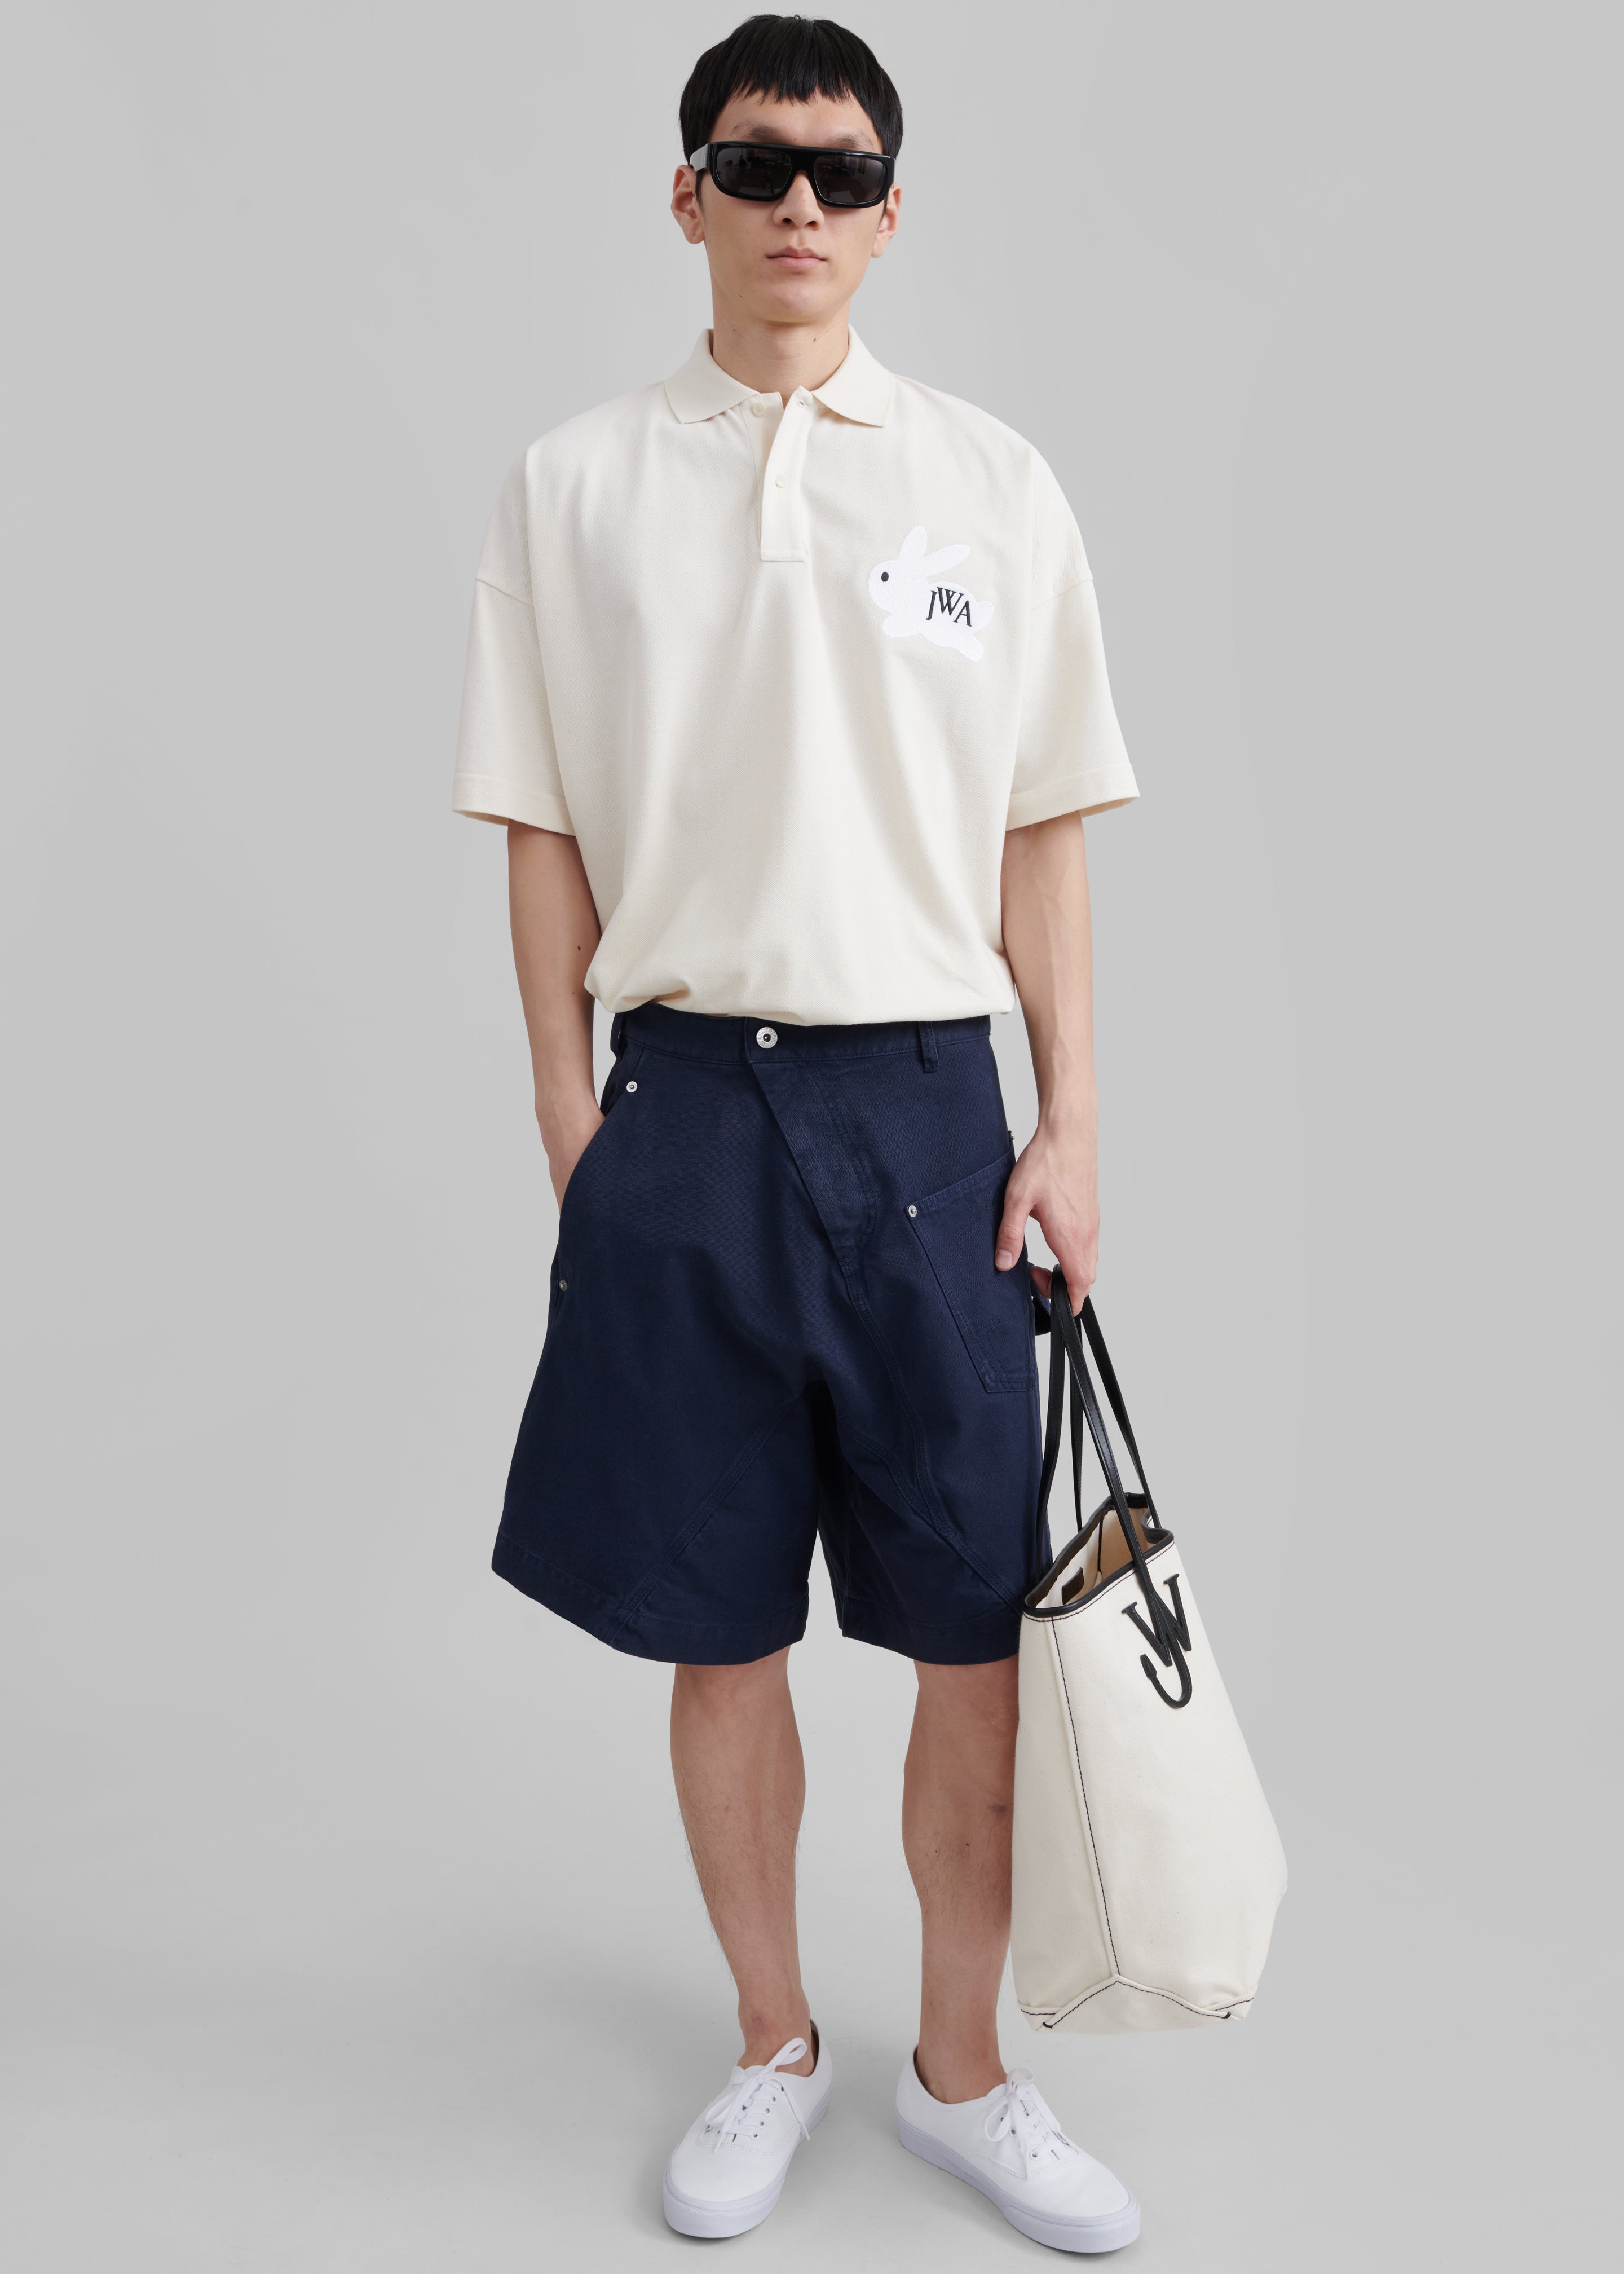 JW Anderson Twisted Shorts - Navy - 1